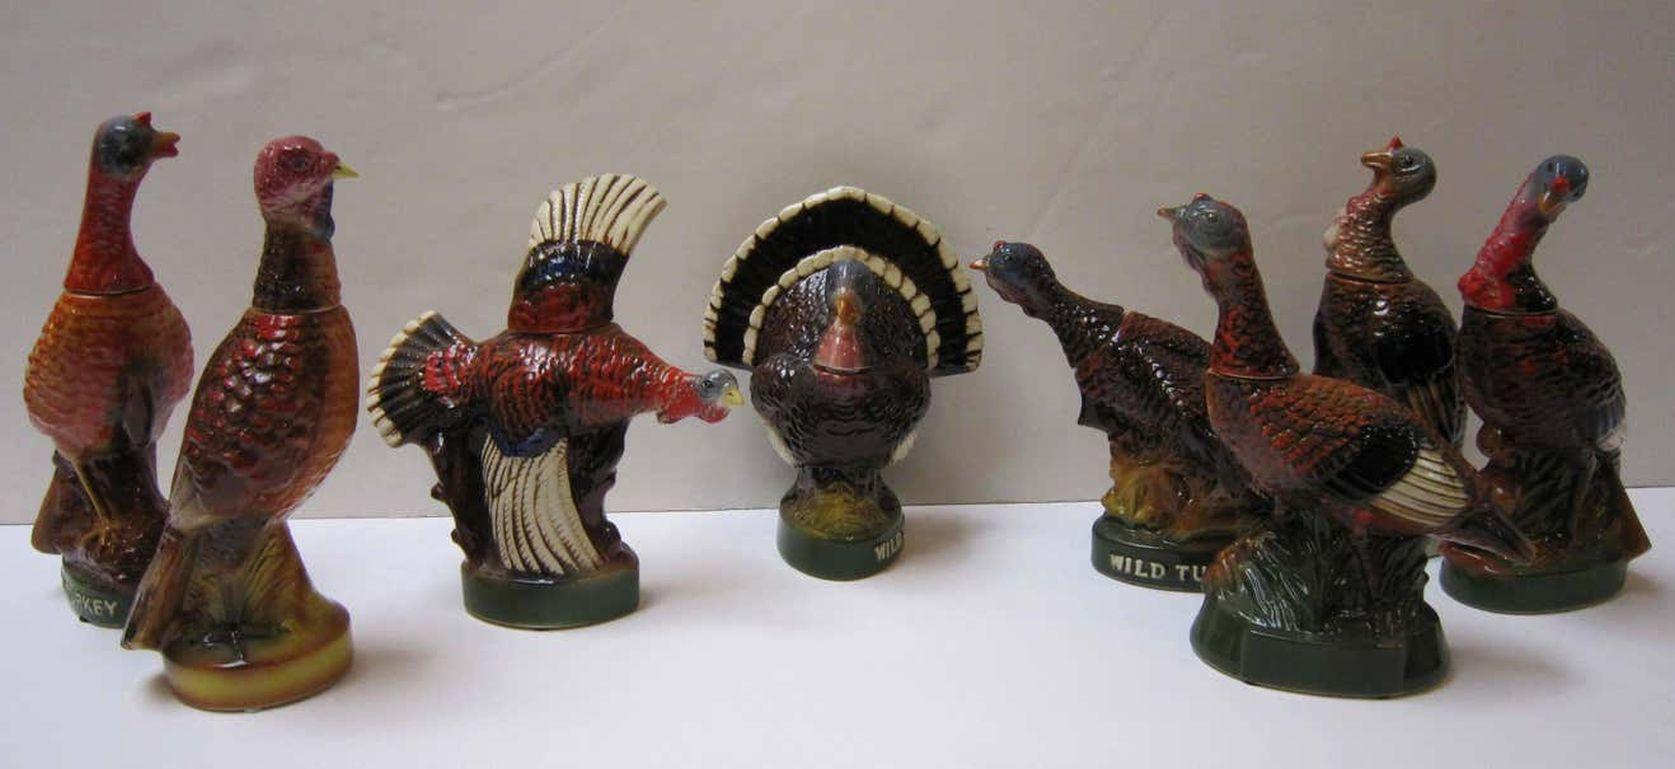 A set of eight large vintage wild Turkey decanters featuring the hard-to-find #one and #two decanters and the popular #three flying and #eight fan-tail decanters.

Marked on base: Austin Nichols ceramic creation liquor bottle, Wild Turkey 101 proof,